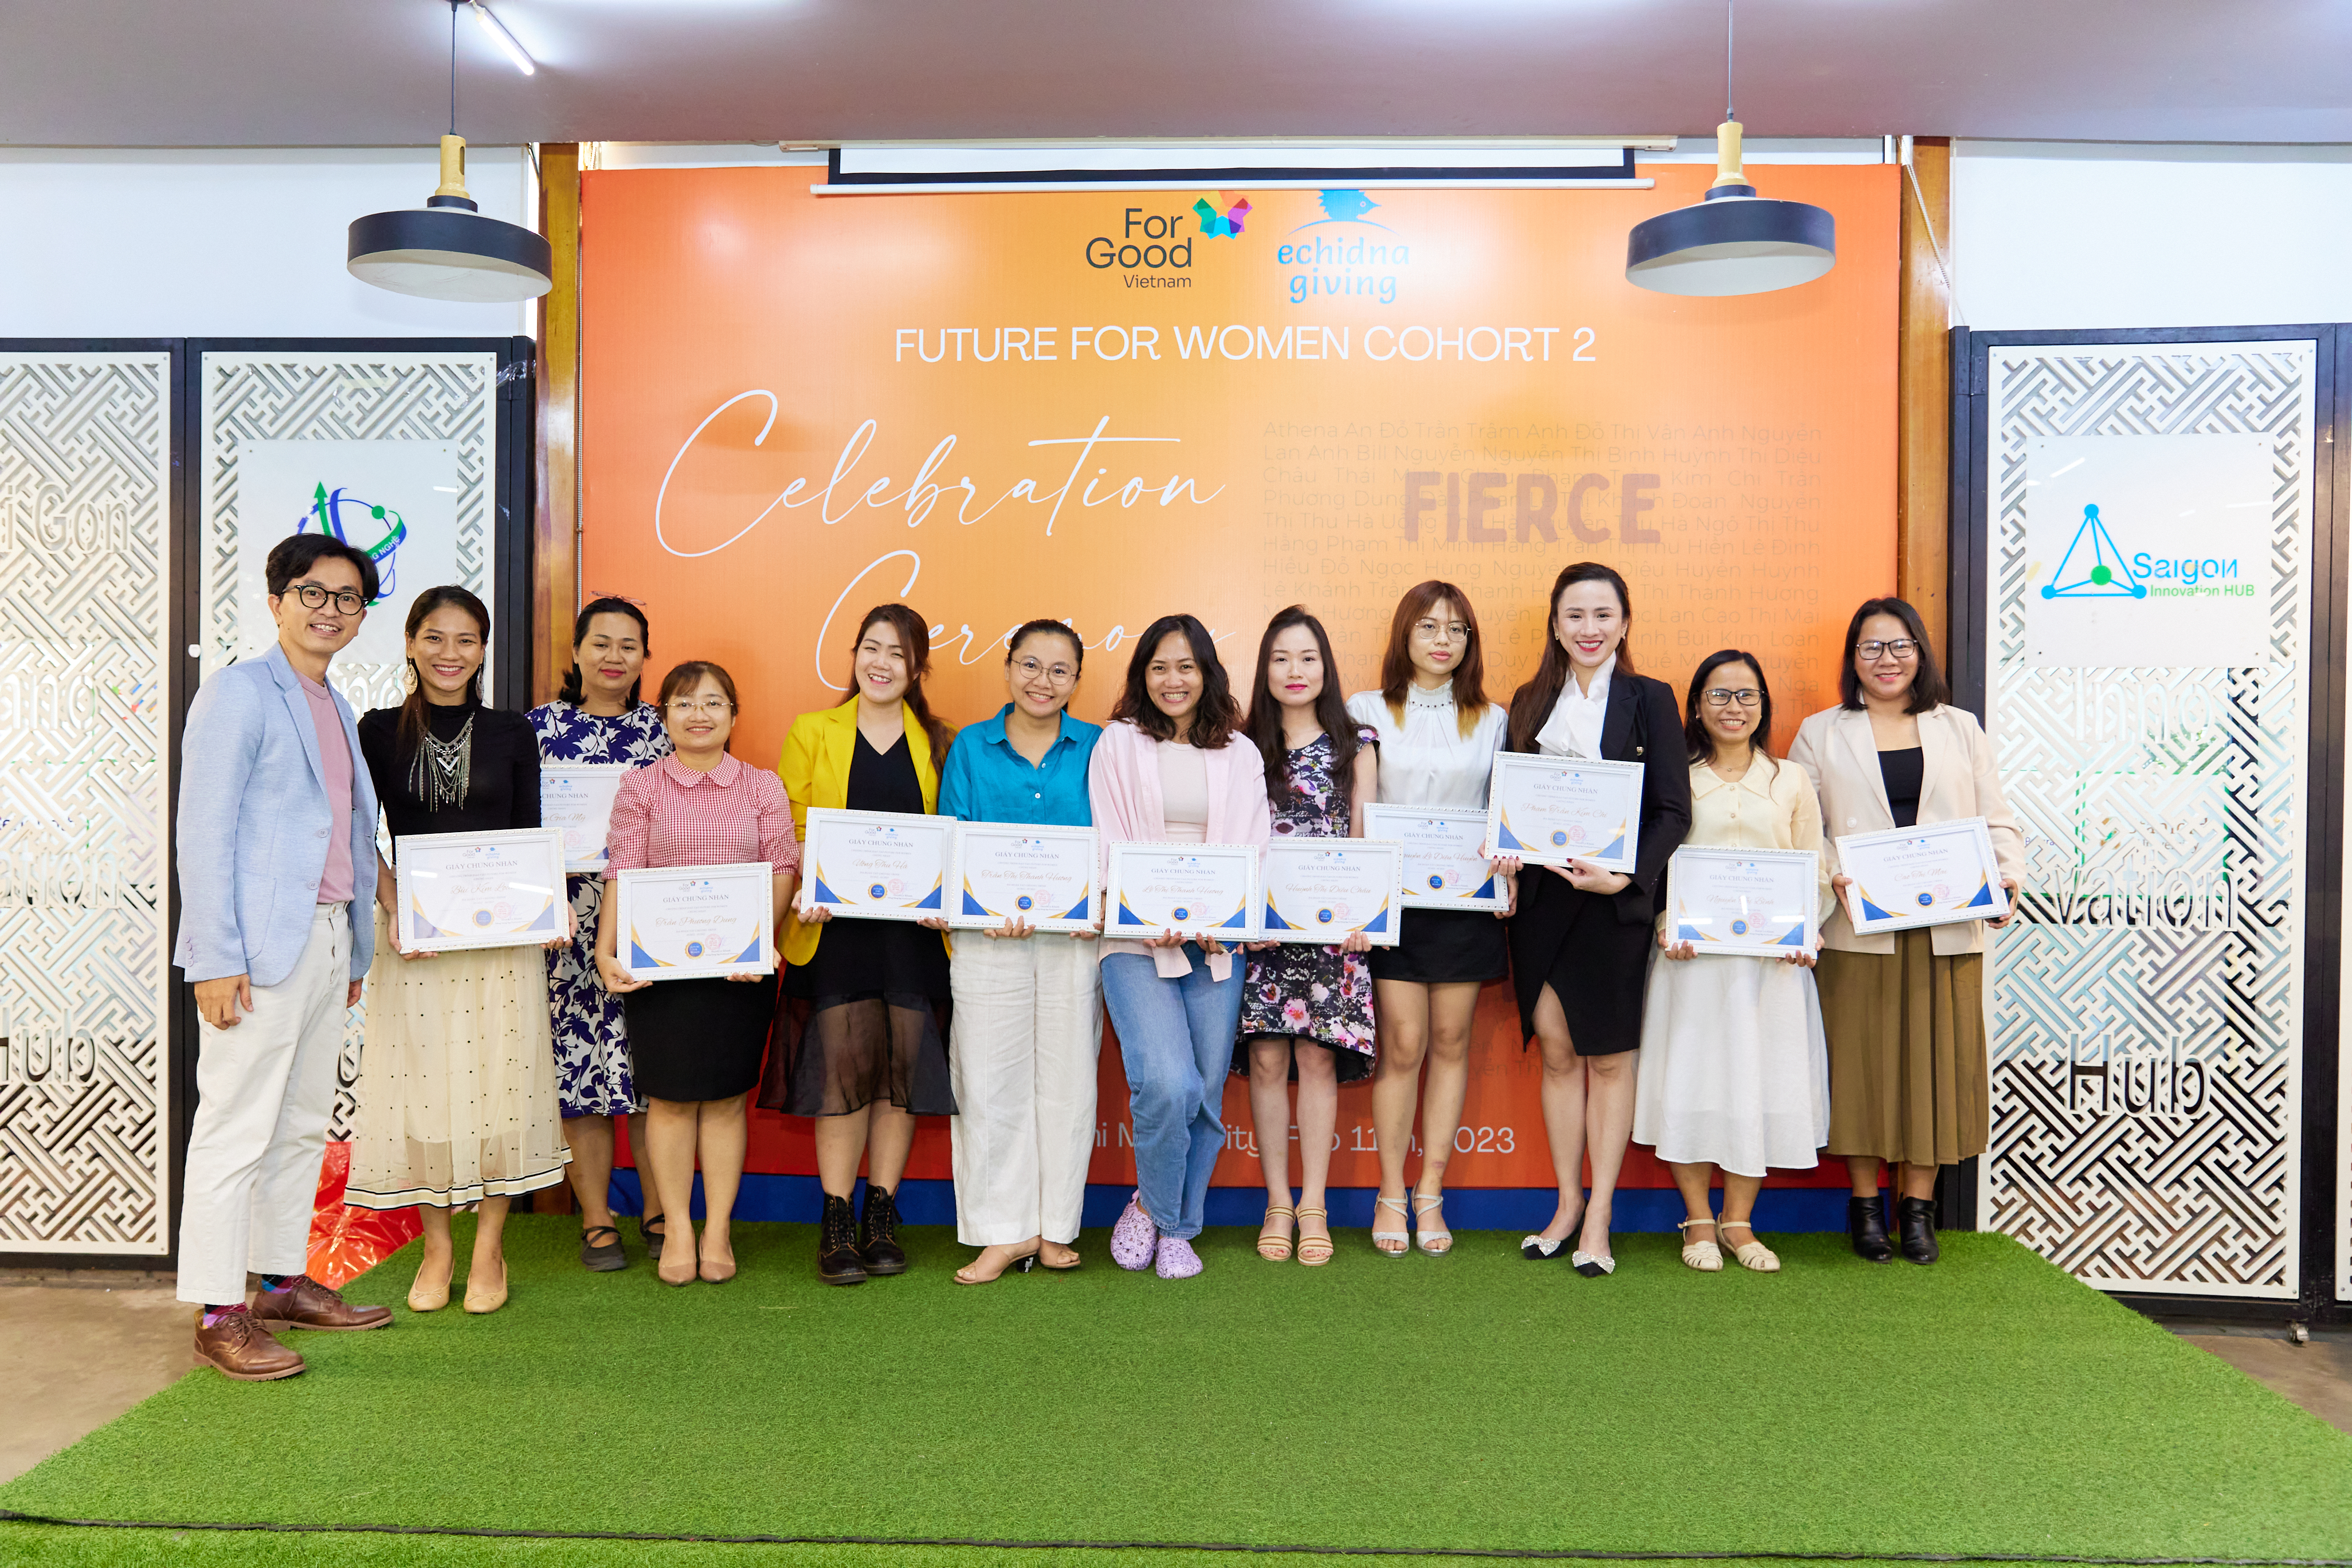 Mentees who completed business plans during the six-month Future For Women program receive achievement certificates at a ceremony on February 11, 2023. Photo: ForGood Vietnam